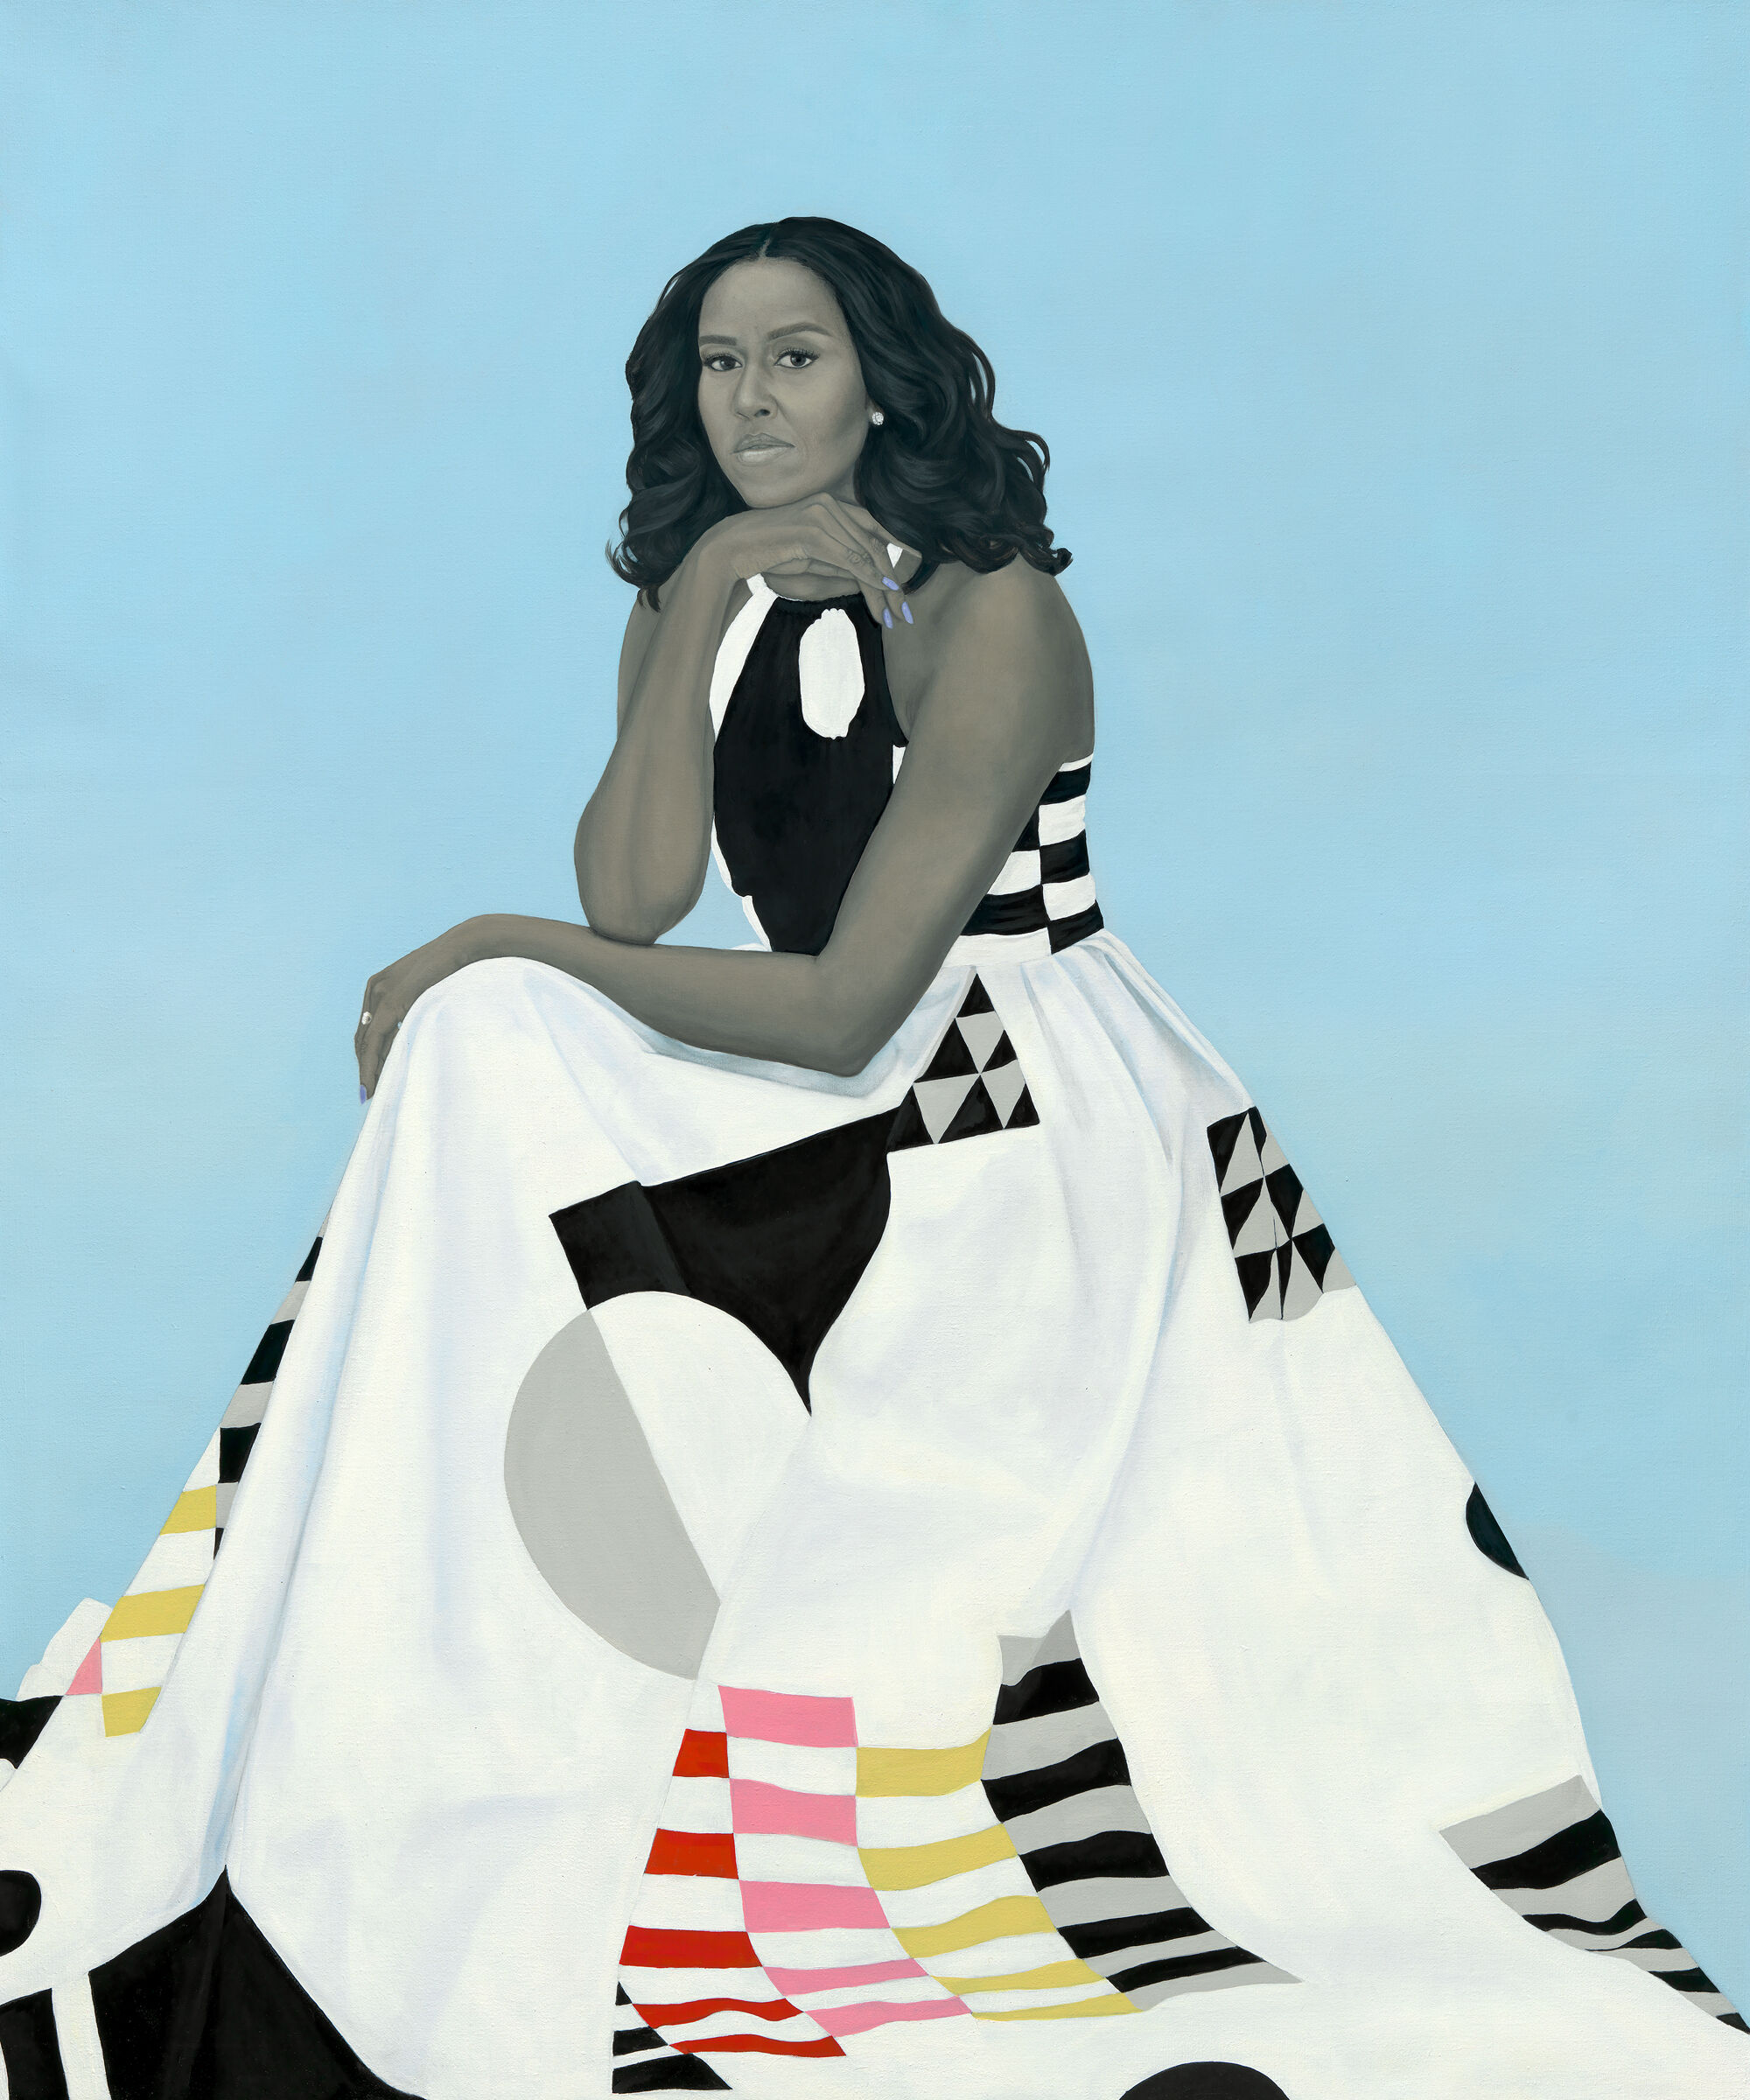 A woman in a patterned dress sits against a light blue background, resting her chin on her hand and looking forward with a calm expression.